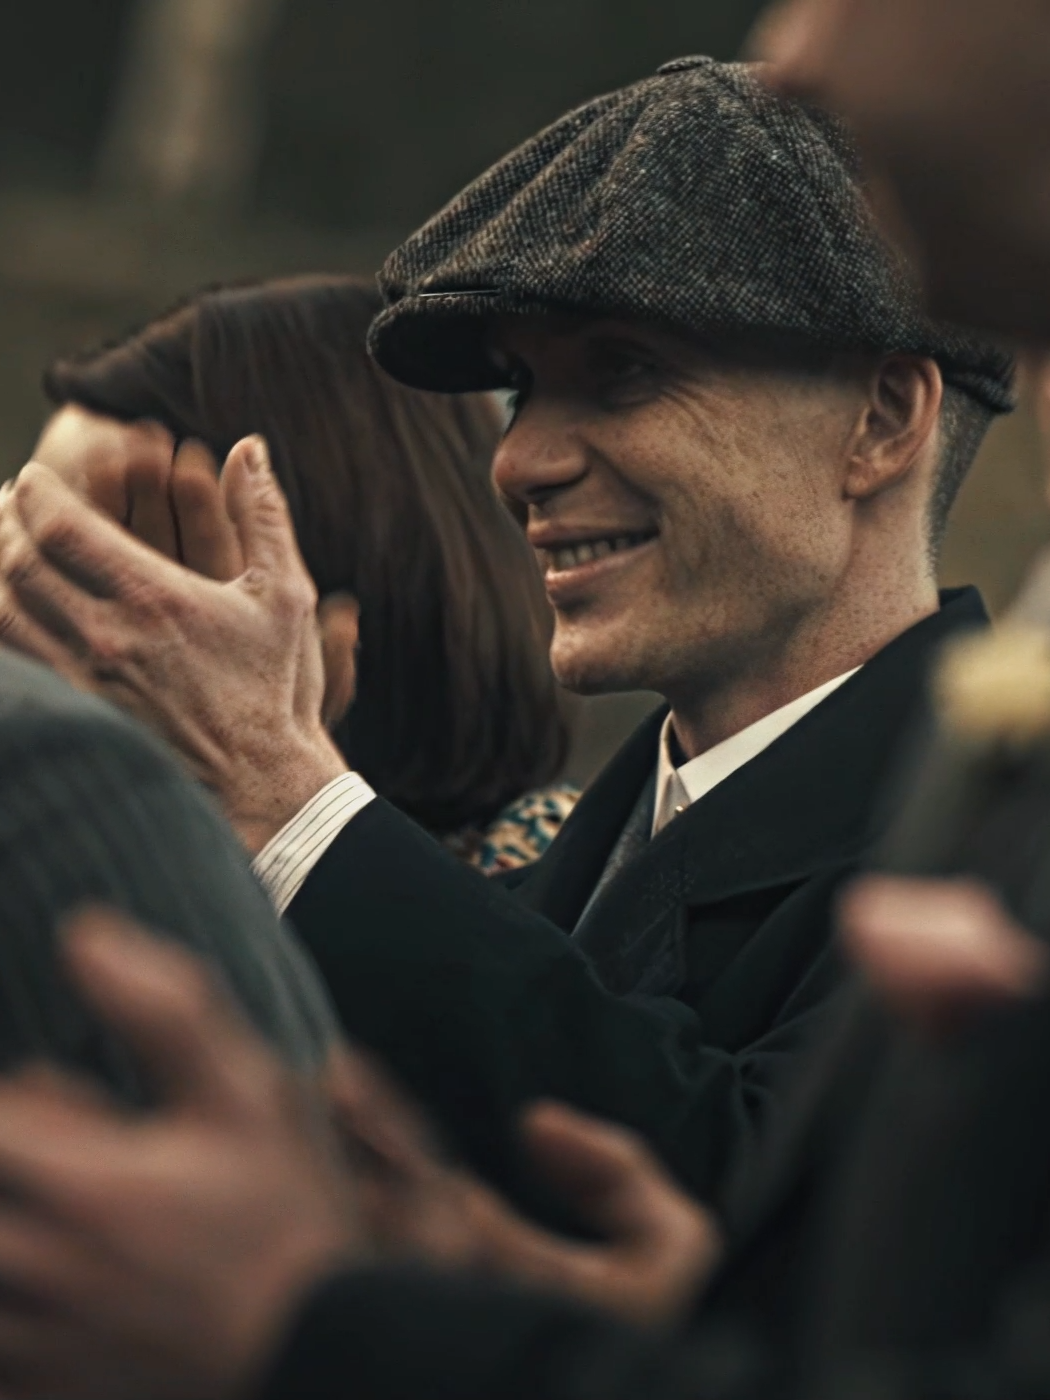 Just the two of us... || #peakyblinders #cillianmurphy #tommyshelby #johnshelby #edit #fyp #viral #aftereffects #underrated